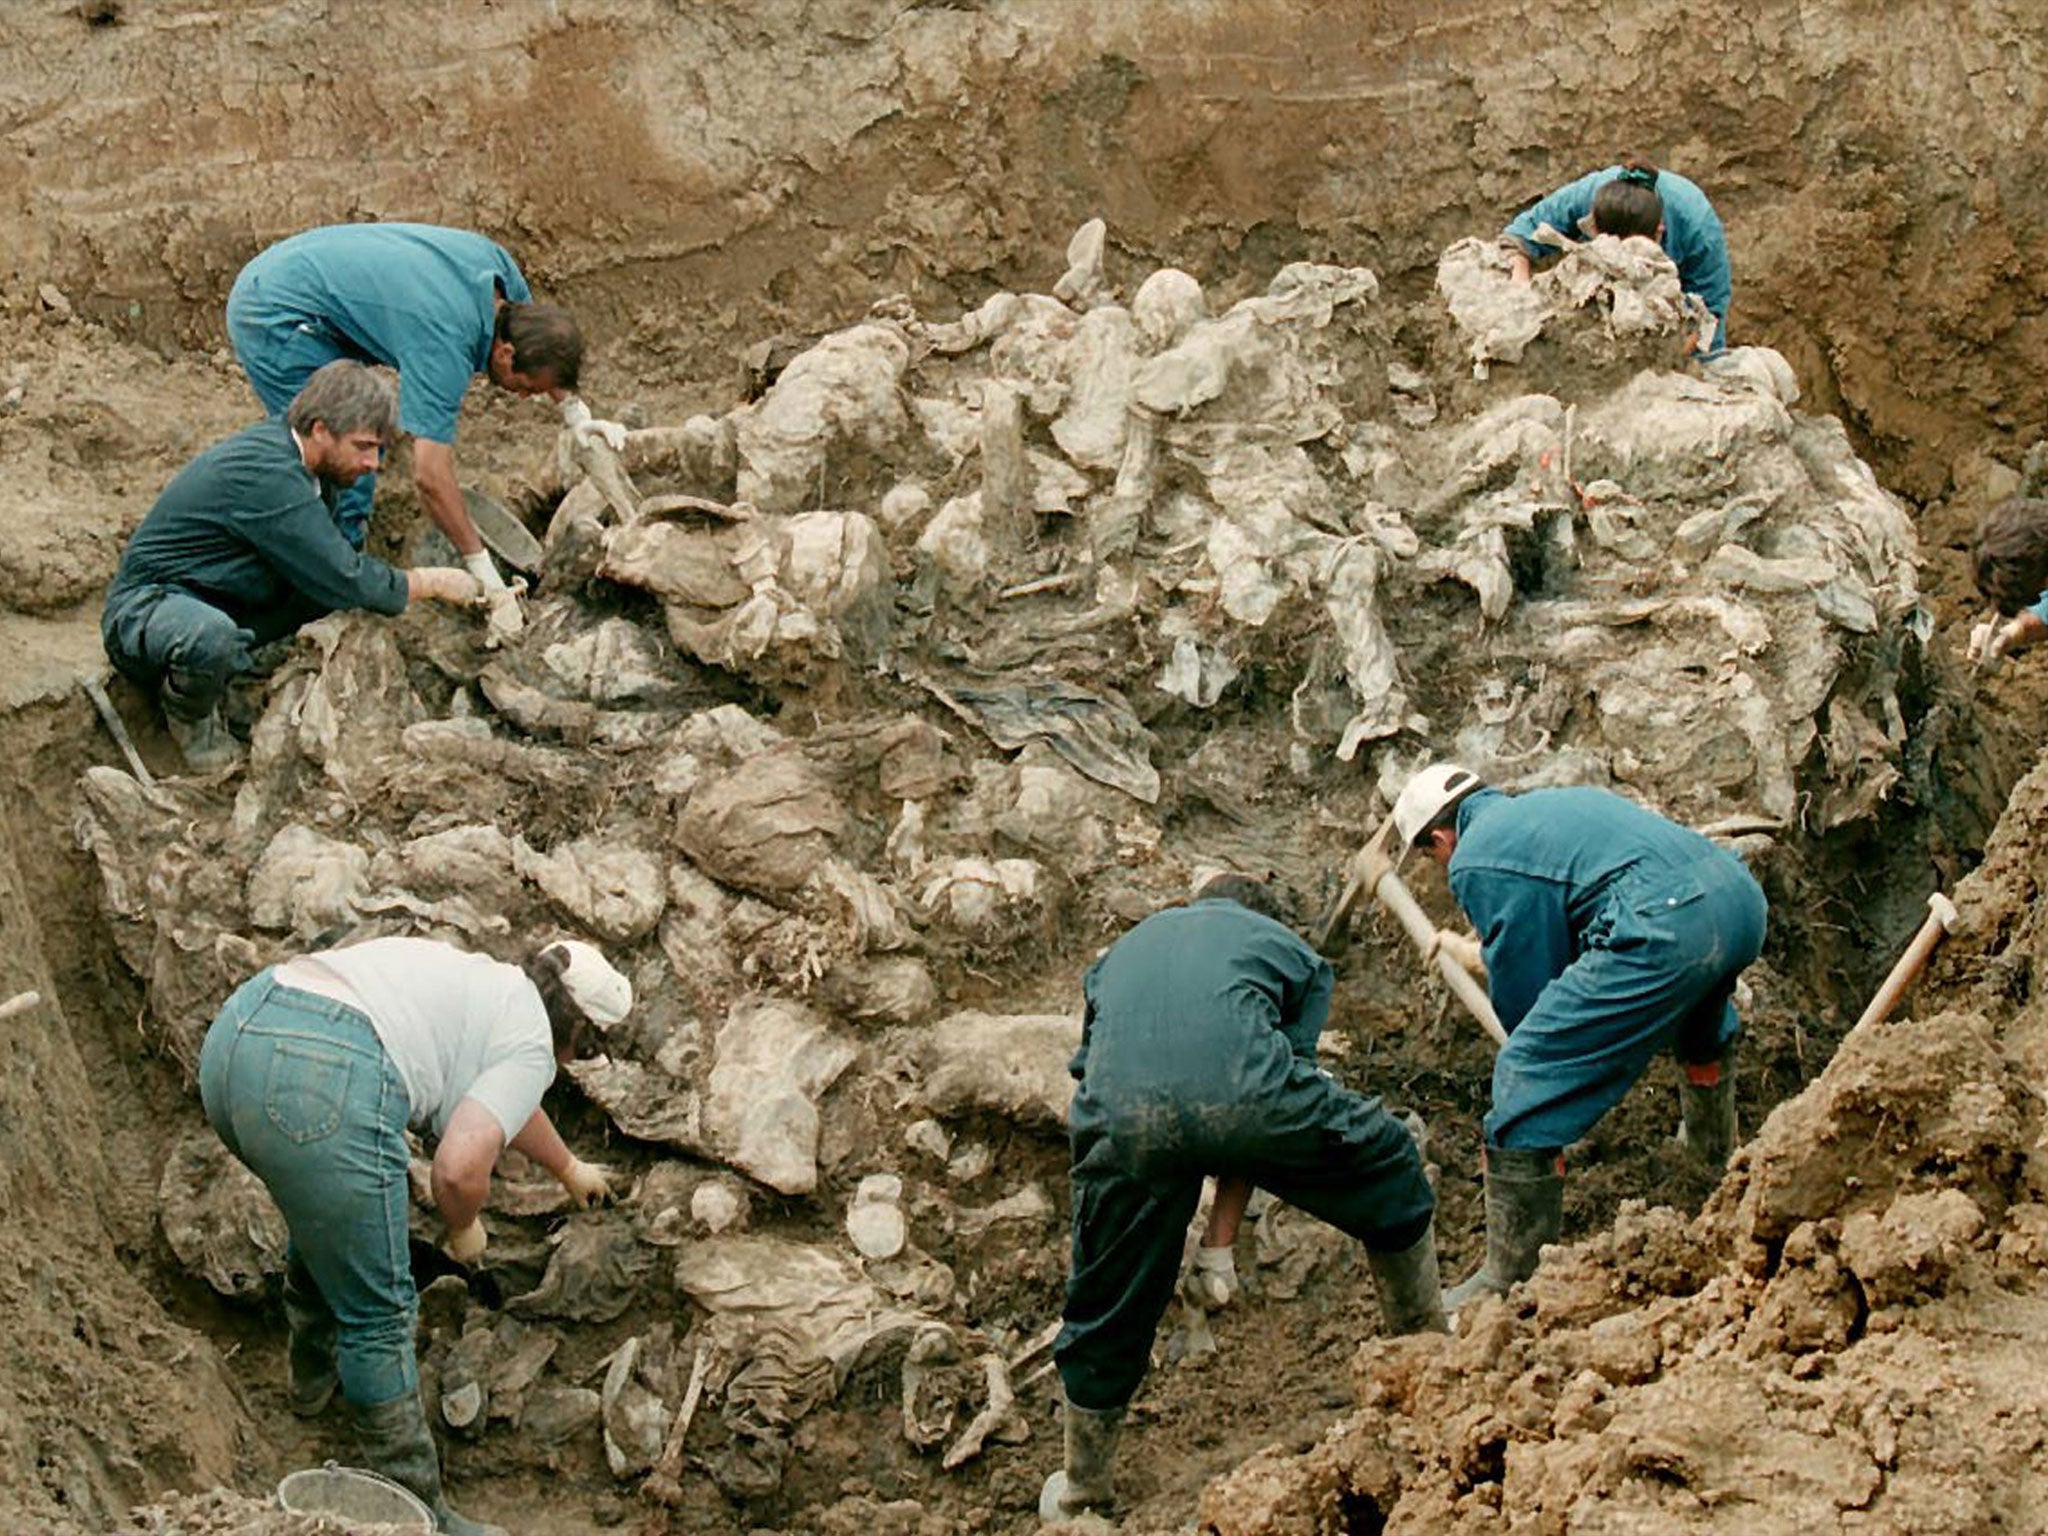 Forensic experts from the International war crimes tribunal in the Hague work on a pile of partly decomposed bodies thought to be some of the 7000 men who went missing from Srebrenica (Getty)